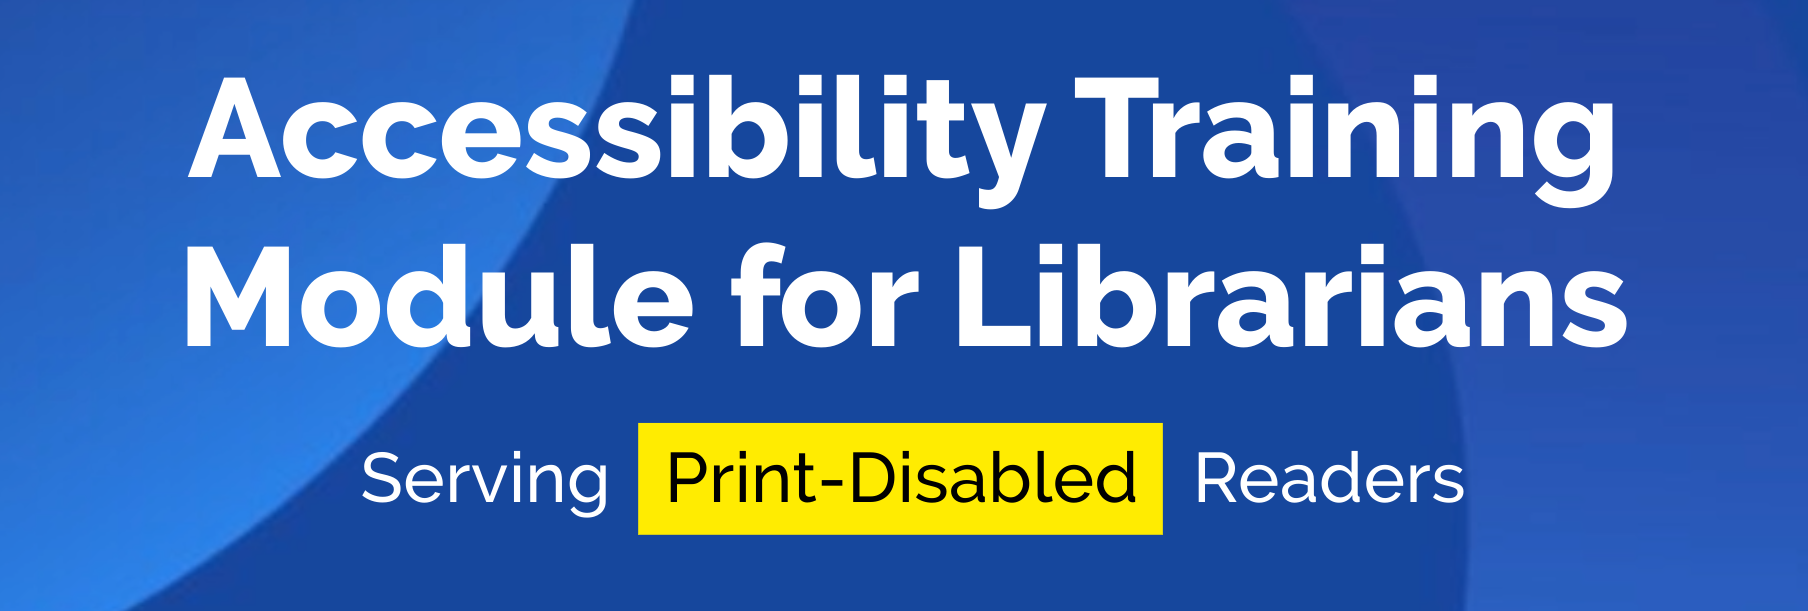 Accessibility Training Module.png 